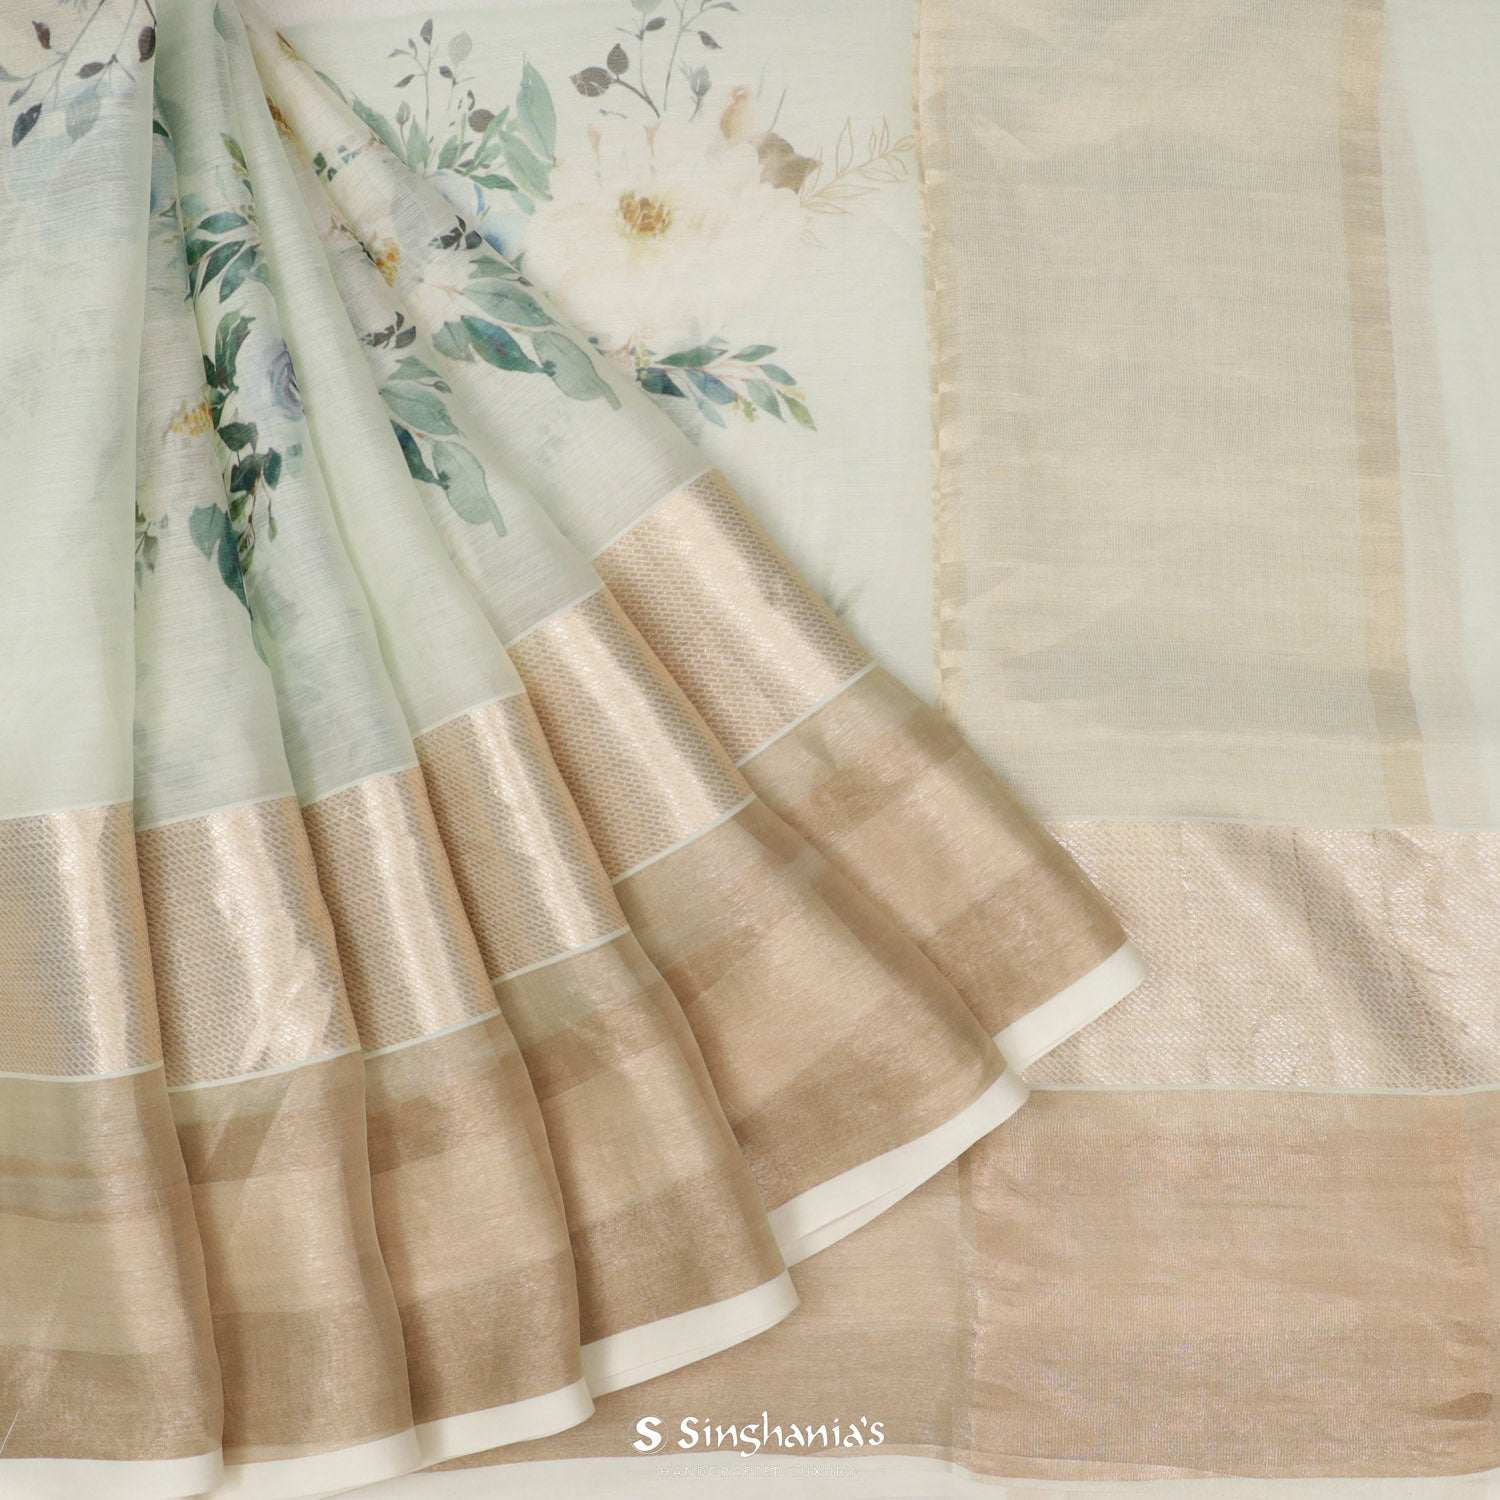 Peppermint White Printed Maheshwari Saree With Floral Pattern